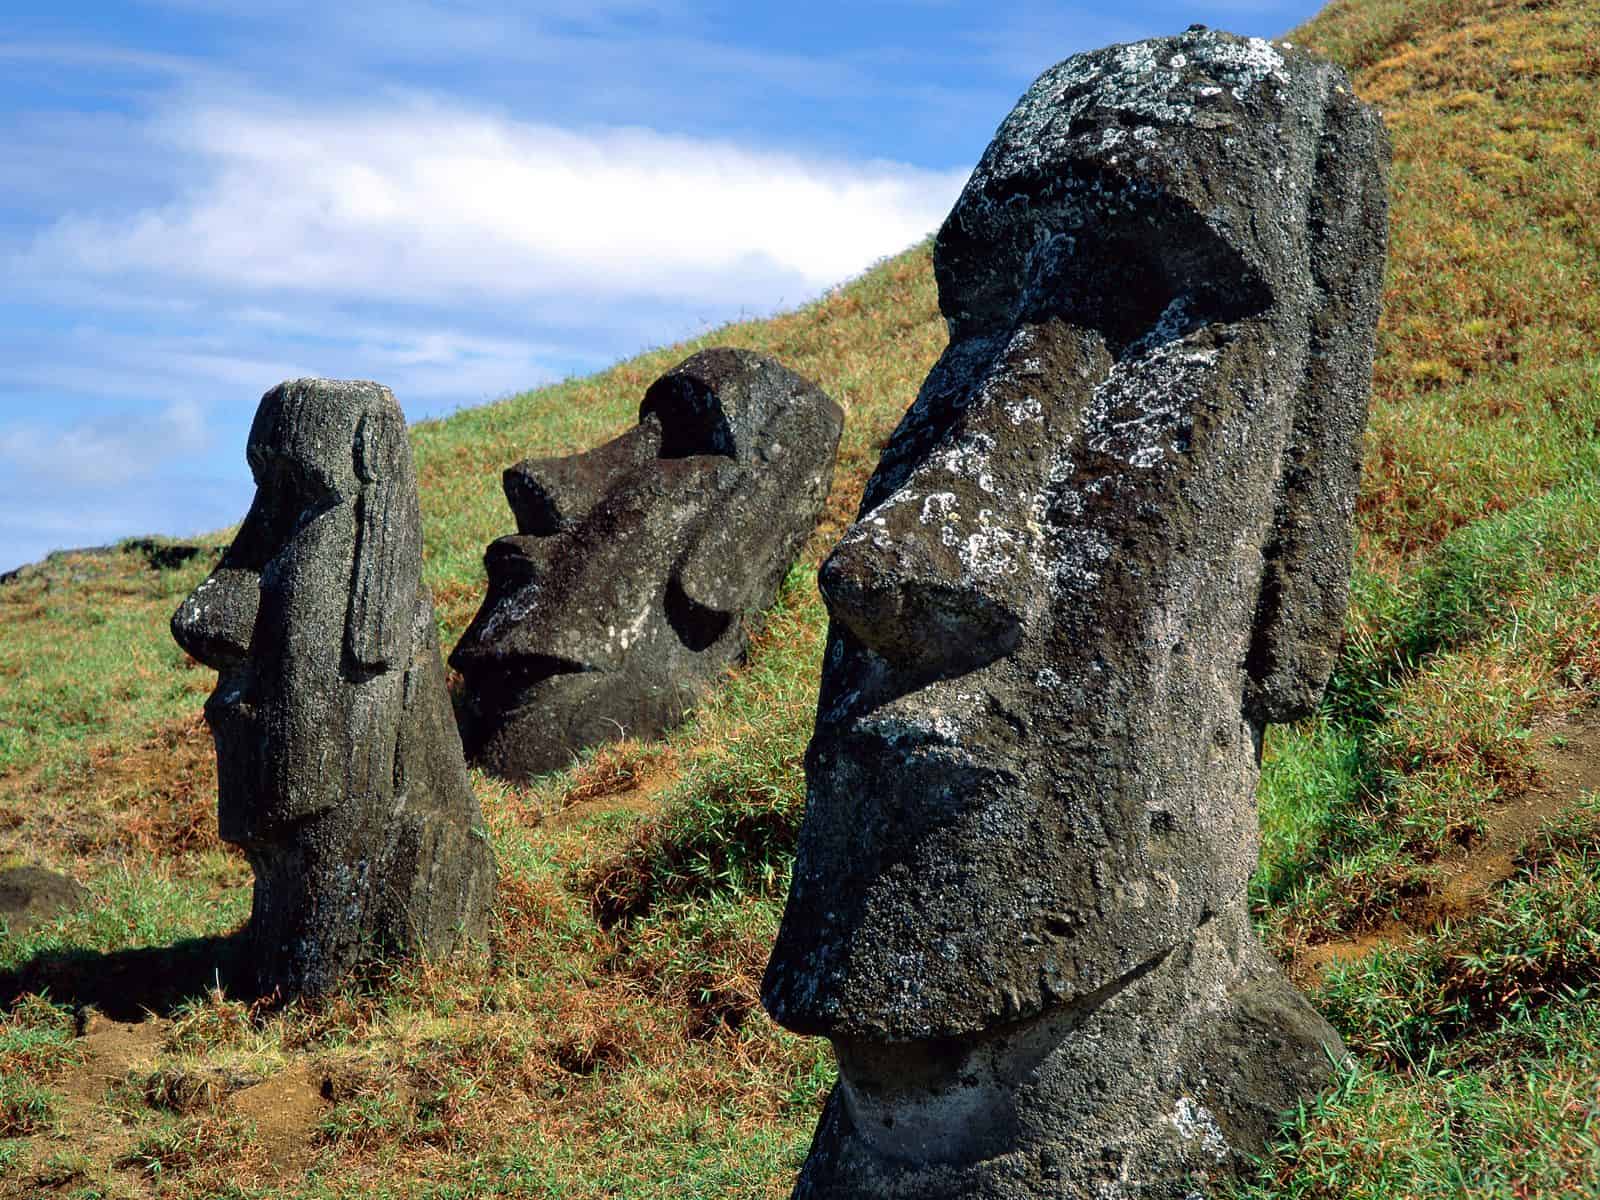 Easter Island Moai monuments are shown on a grassy slope with a blue sky with a soft white cloud above